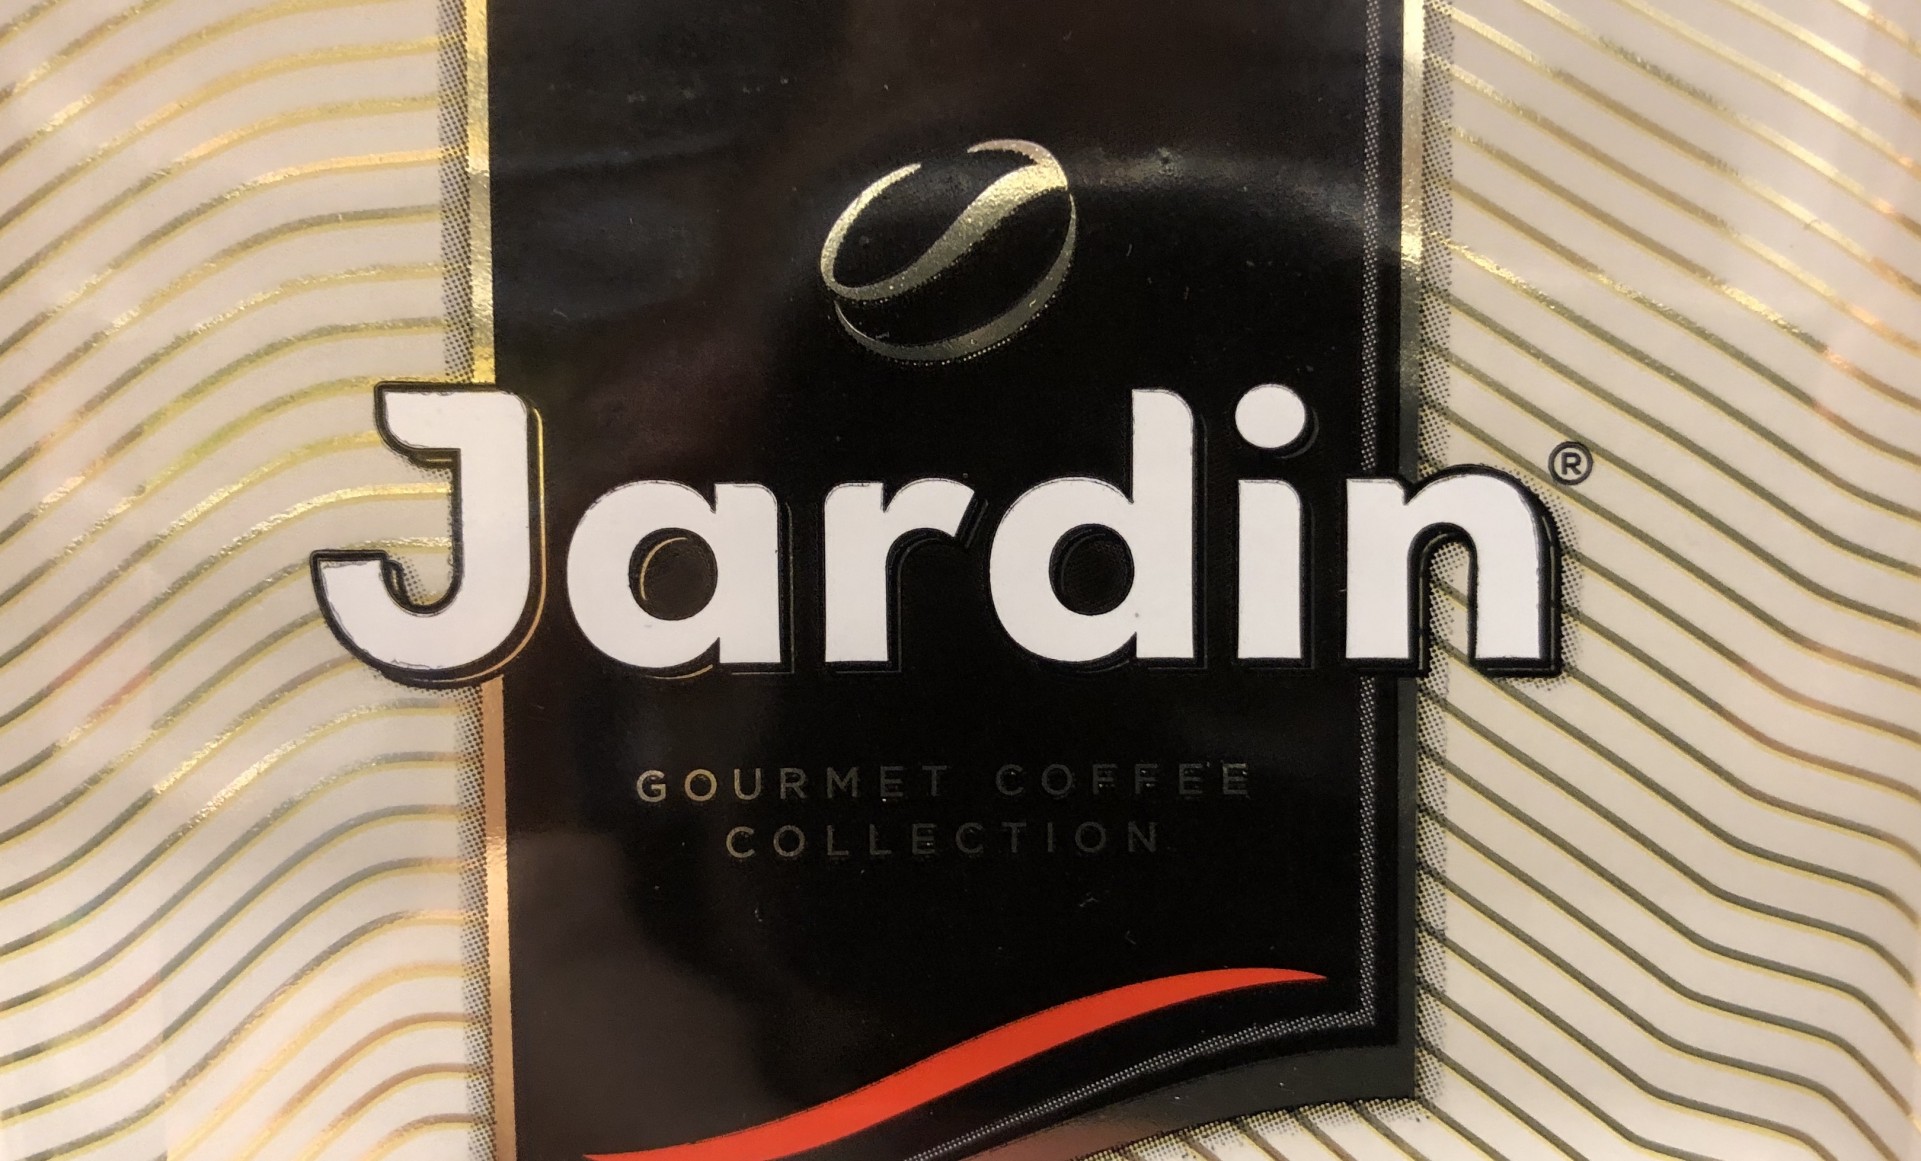 &#128270; What is the typography of the "Jardin" word? Please.